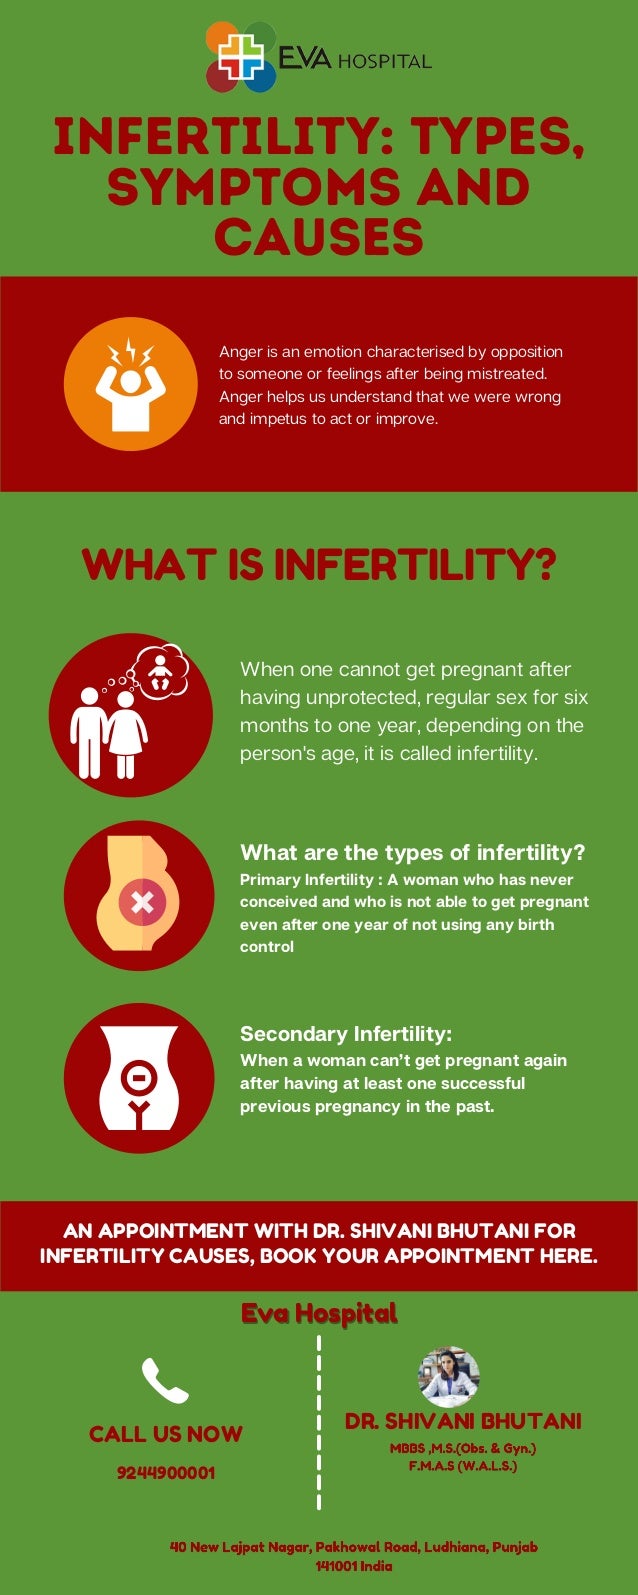 INFERTILITY: TYPES,
SYMPTOMS AND
CAUSES
AN APPOINTMENT WITH DR. SHIVANI BHUTANI FOR
INFERTILITY CAUSES, BOOK YOUR APPOINTMENT HERE.
Anger is an emotion characterised by opposition
to someone or feelings after being mistreated.
Anger helps us understand that we were wrong
and impetus to act or improve.
WHAT IS INFERTILITY?
What are the types of infertility?
Primary Infertility : A woman who has never
conceived and who is not able to get pregnant
even after one year of not using any birth
control
When one cannot get pregnant after
having unprotected, regular sex for six
months to one year, depending on the
person's age, it is called infertility.
Secondary Infertility:
When a woman can’t get pregnant again
after having at least one successful
previous pregnancy in the past.
DR. SHIVANI BHUTANI
9244900001
CALL US NOW
Eva Hospital
Eva Hospital
 